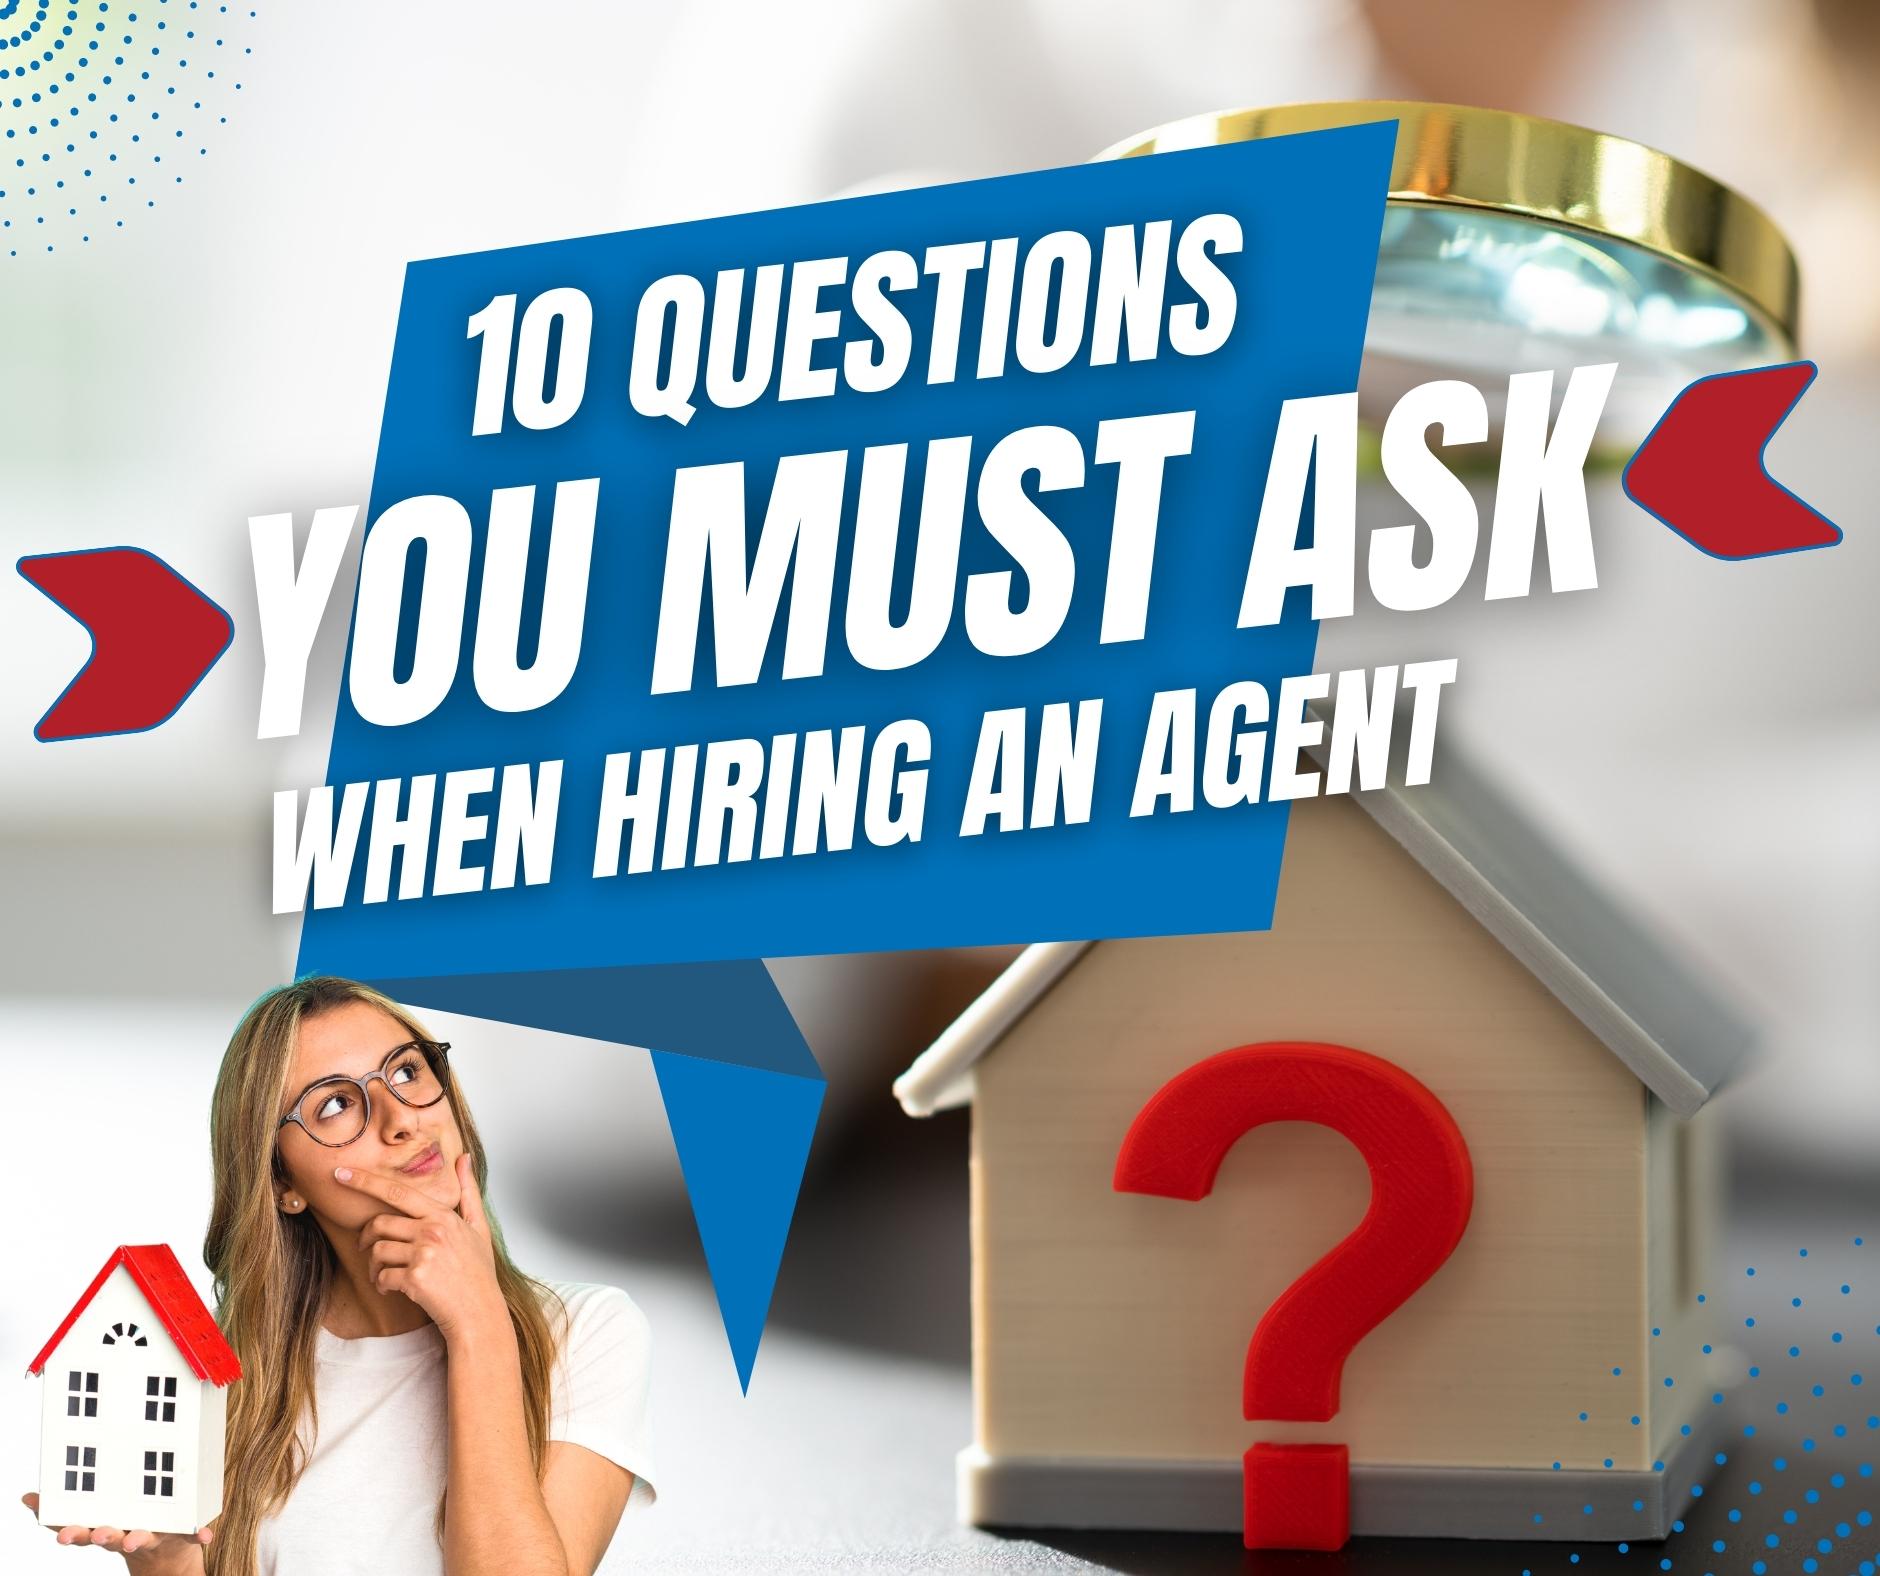 10 Questions You Must Ask When Hiring An Agent